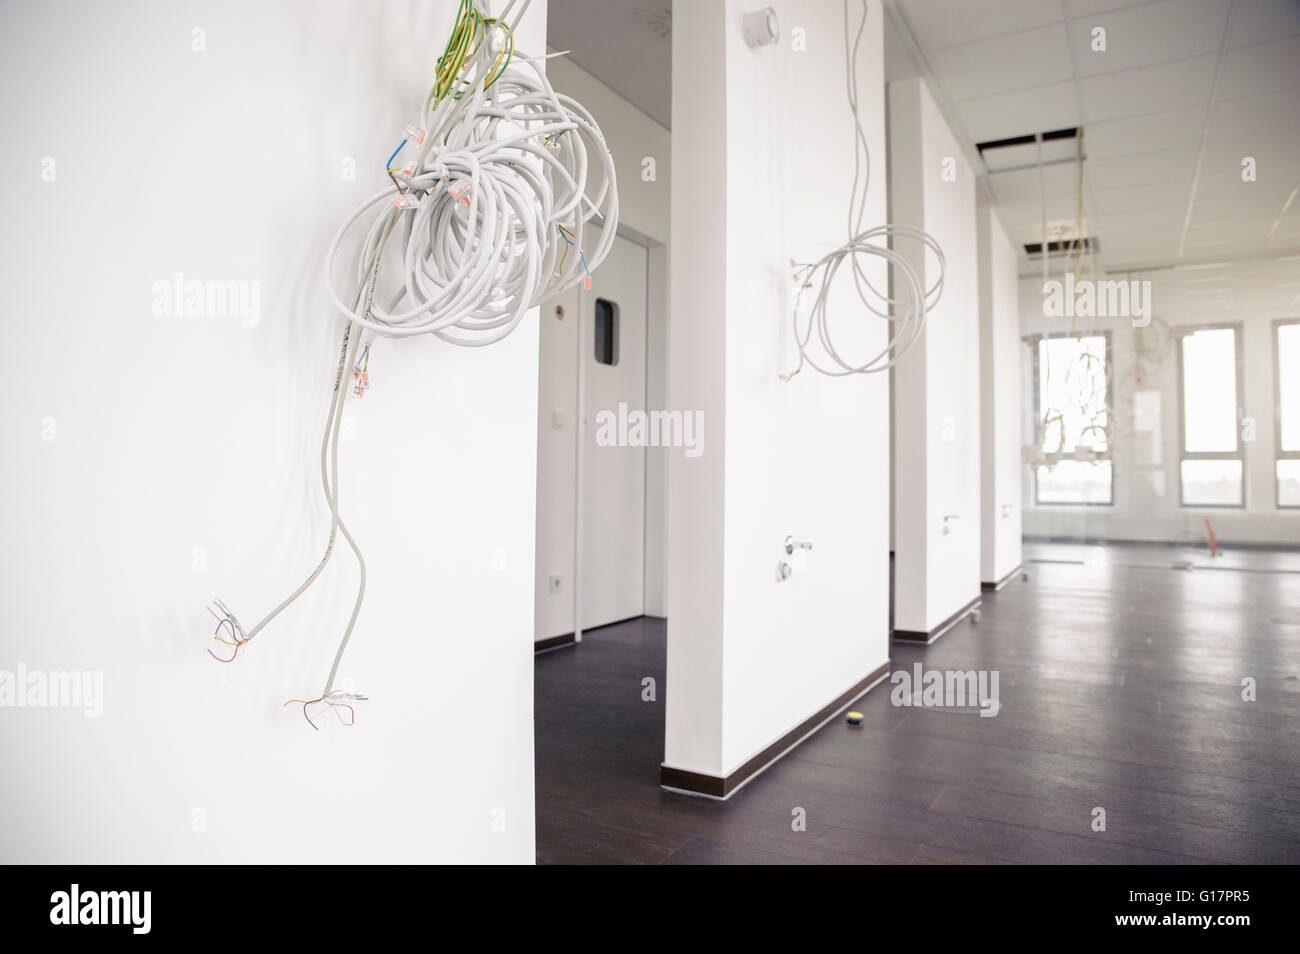 Network and power cables hanging from new office ceiling Stock Photo